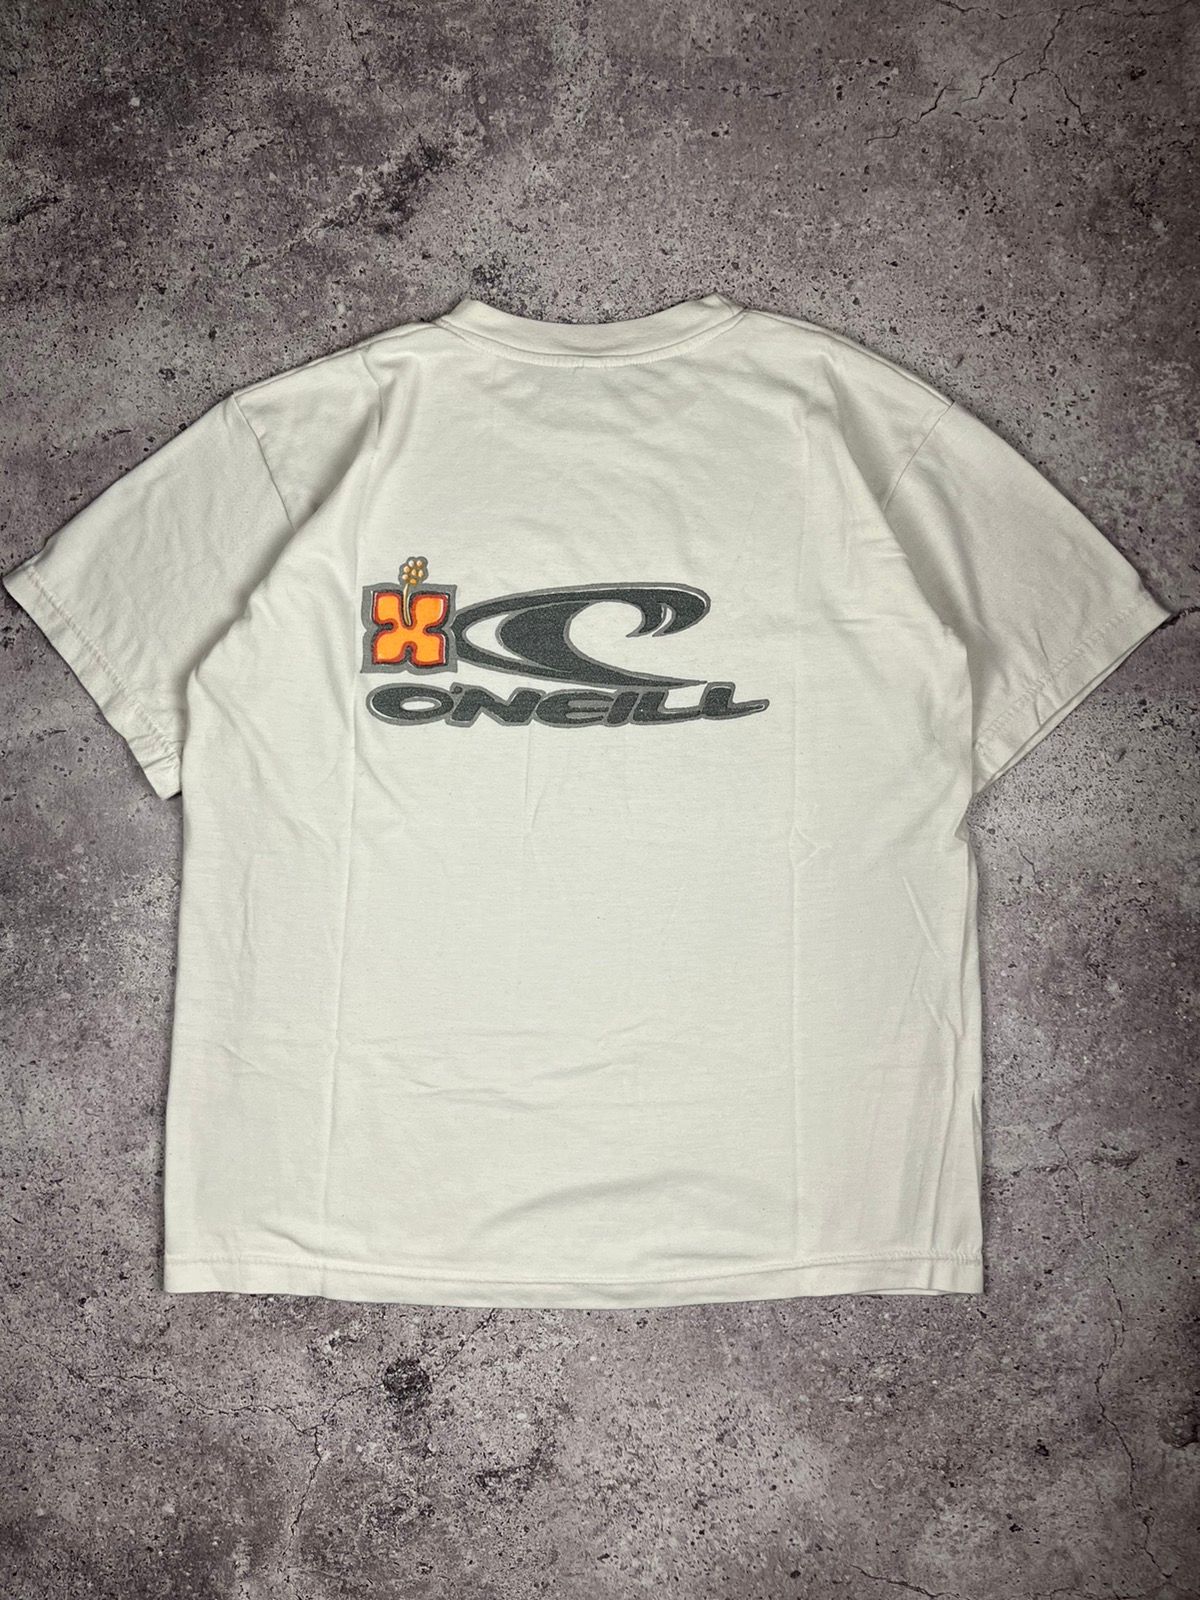 Pre-owned Oneill X Vintage 90's Oneill O'neill Streetwear White Tee (surf Style)